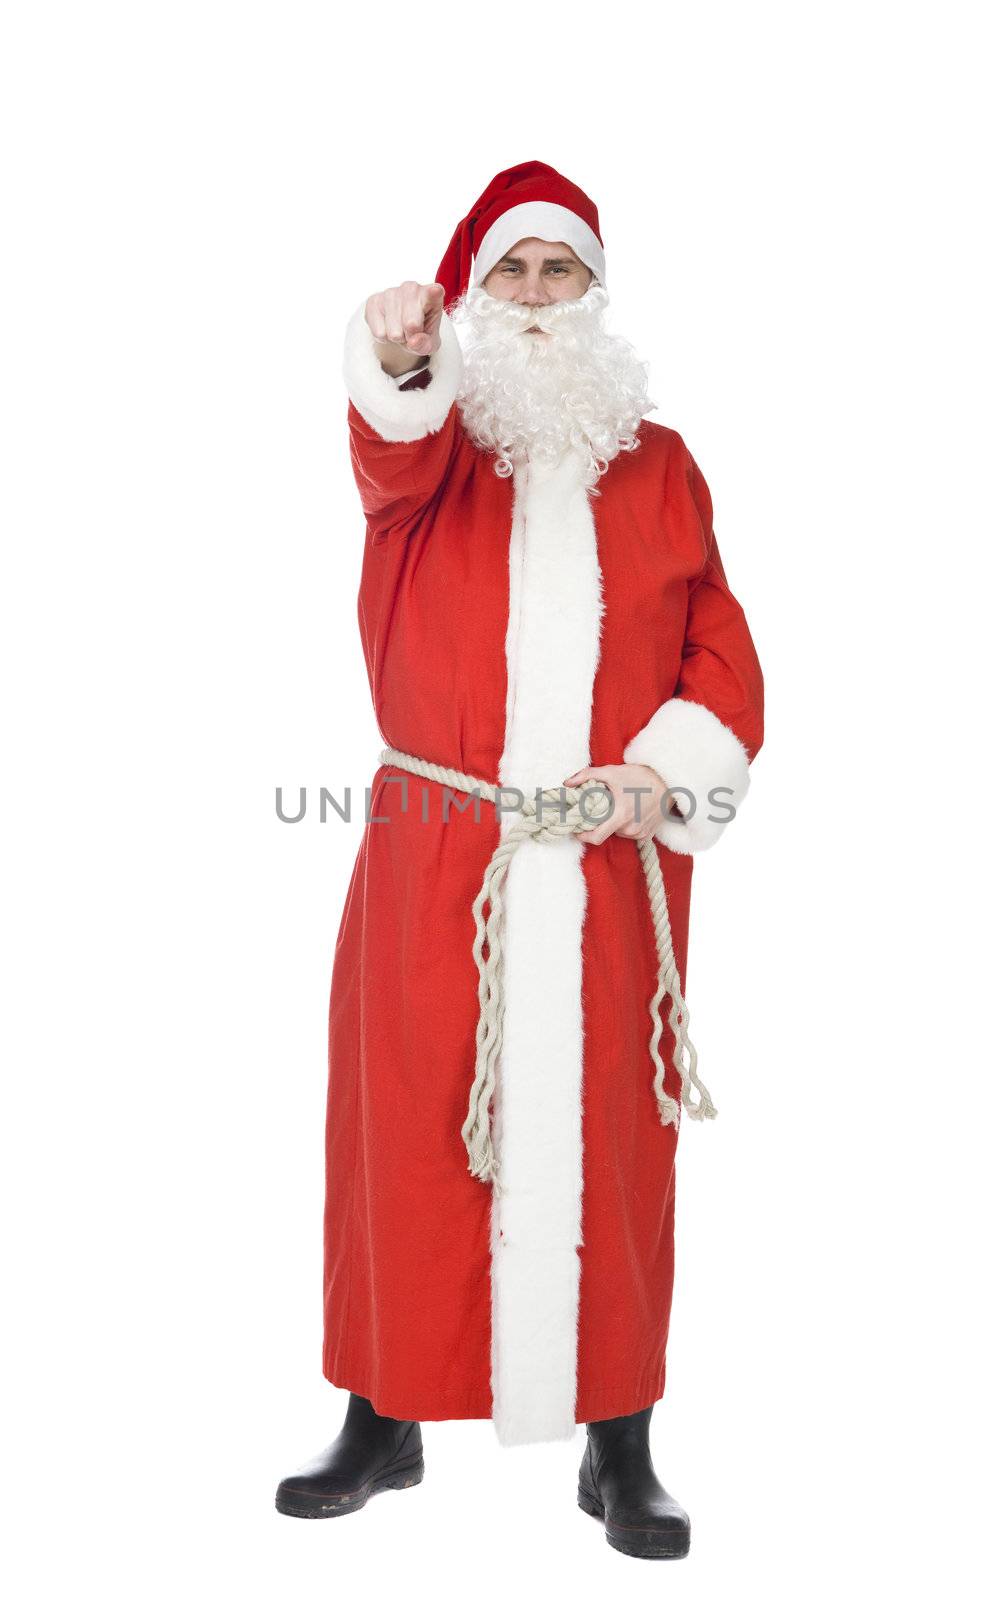 Santa claus is pointing at the camera isolated on white